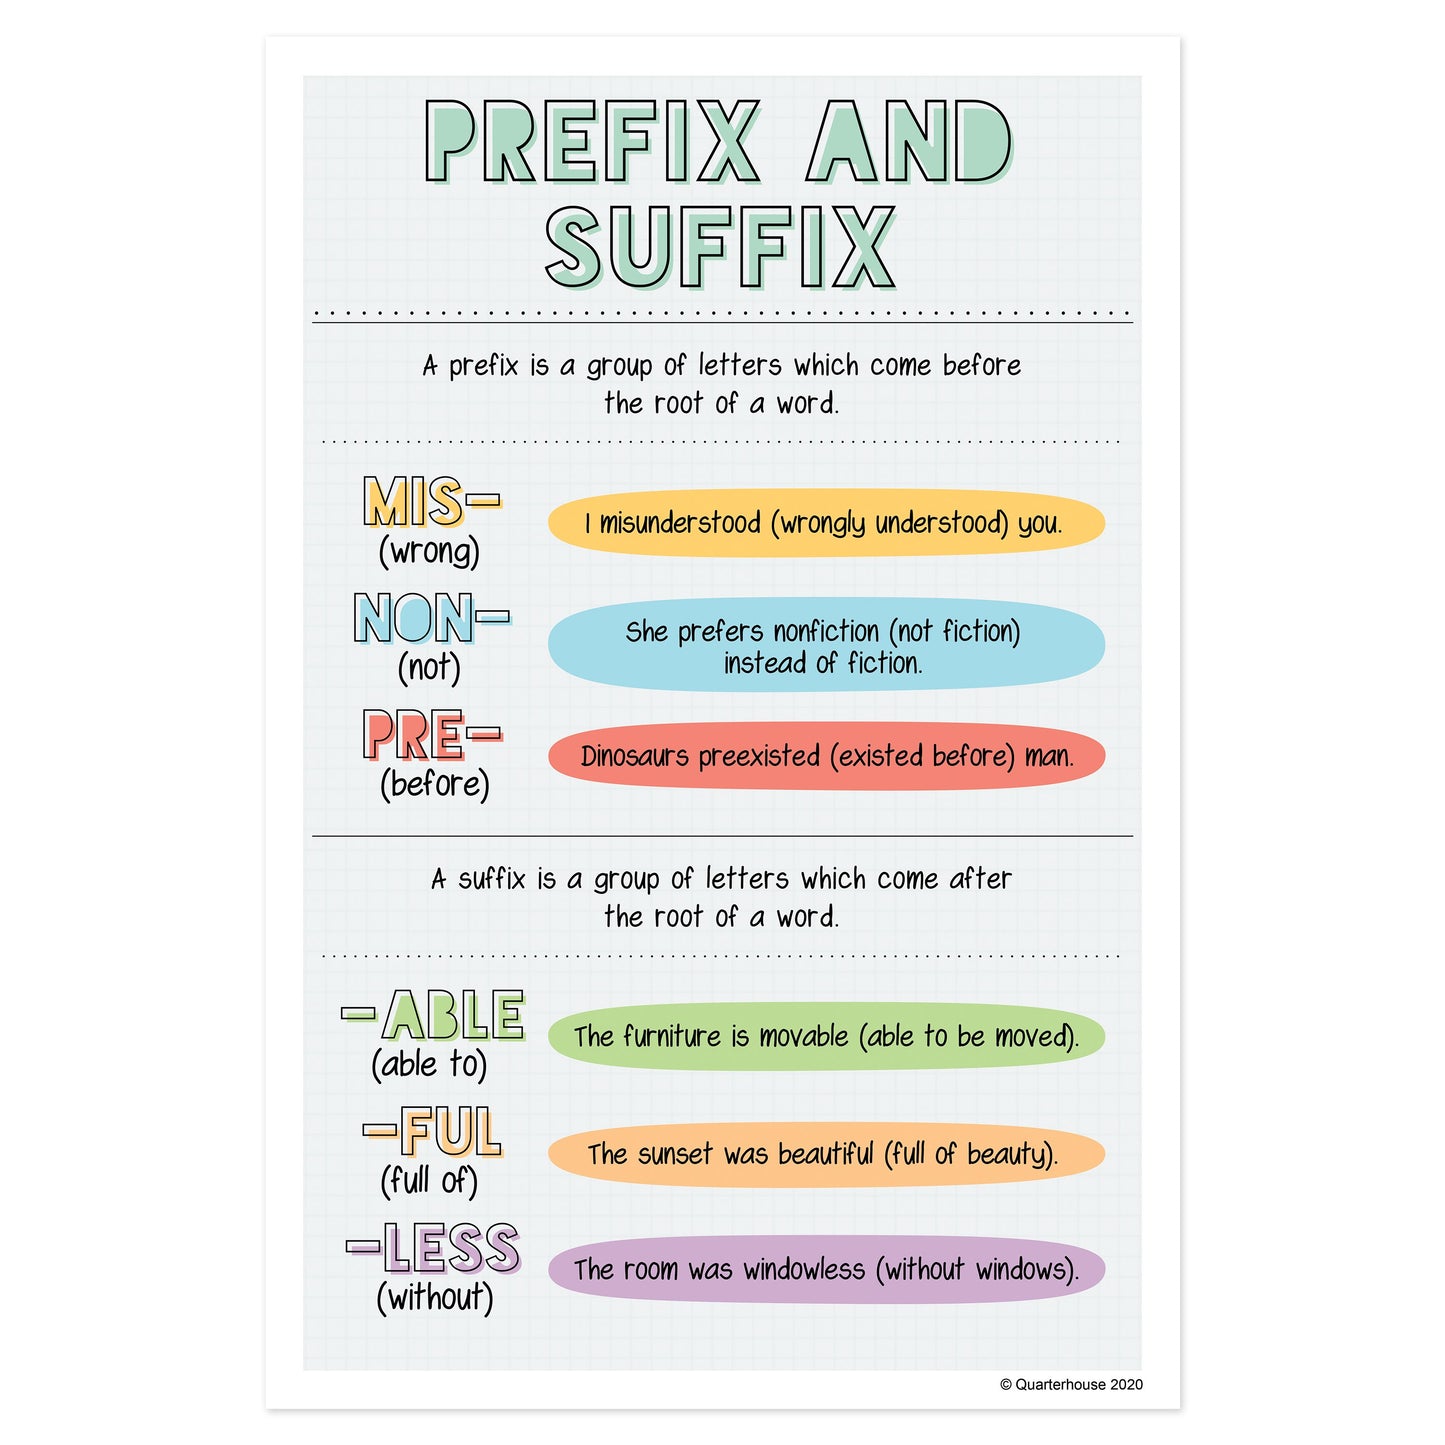 Quarterhouse Prefixes and Suffixes in Writing Poster, English-Language Arts Classroom Materials for Teachers